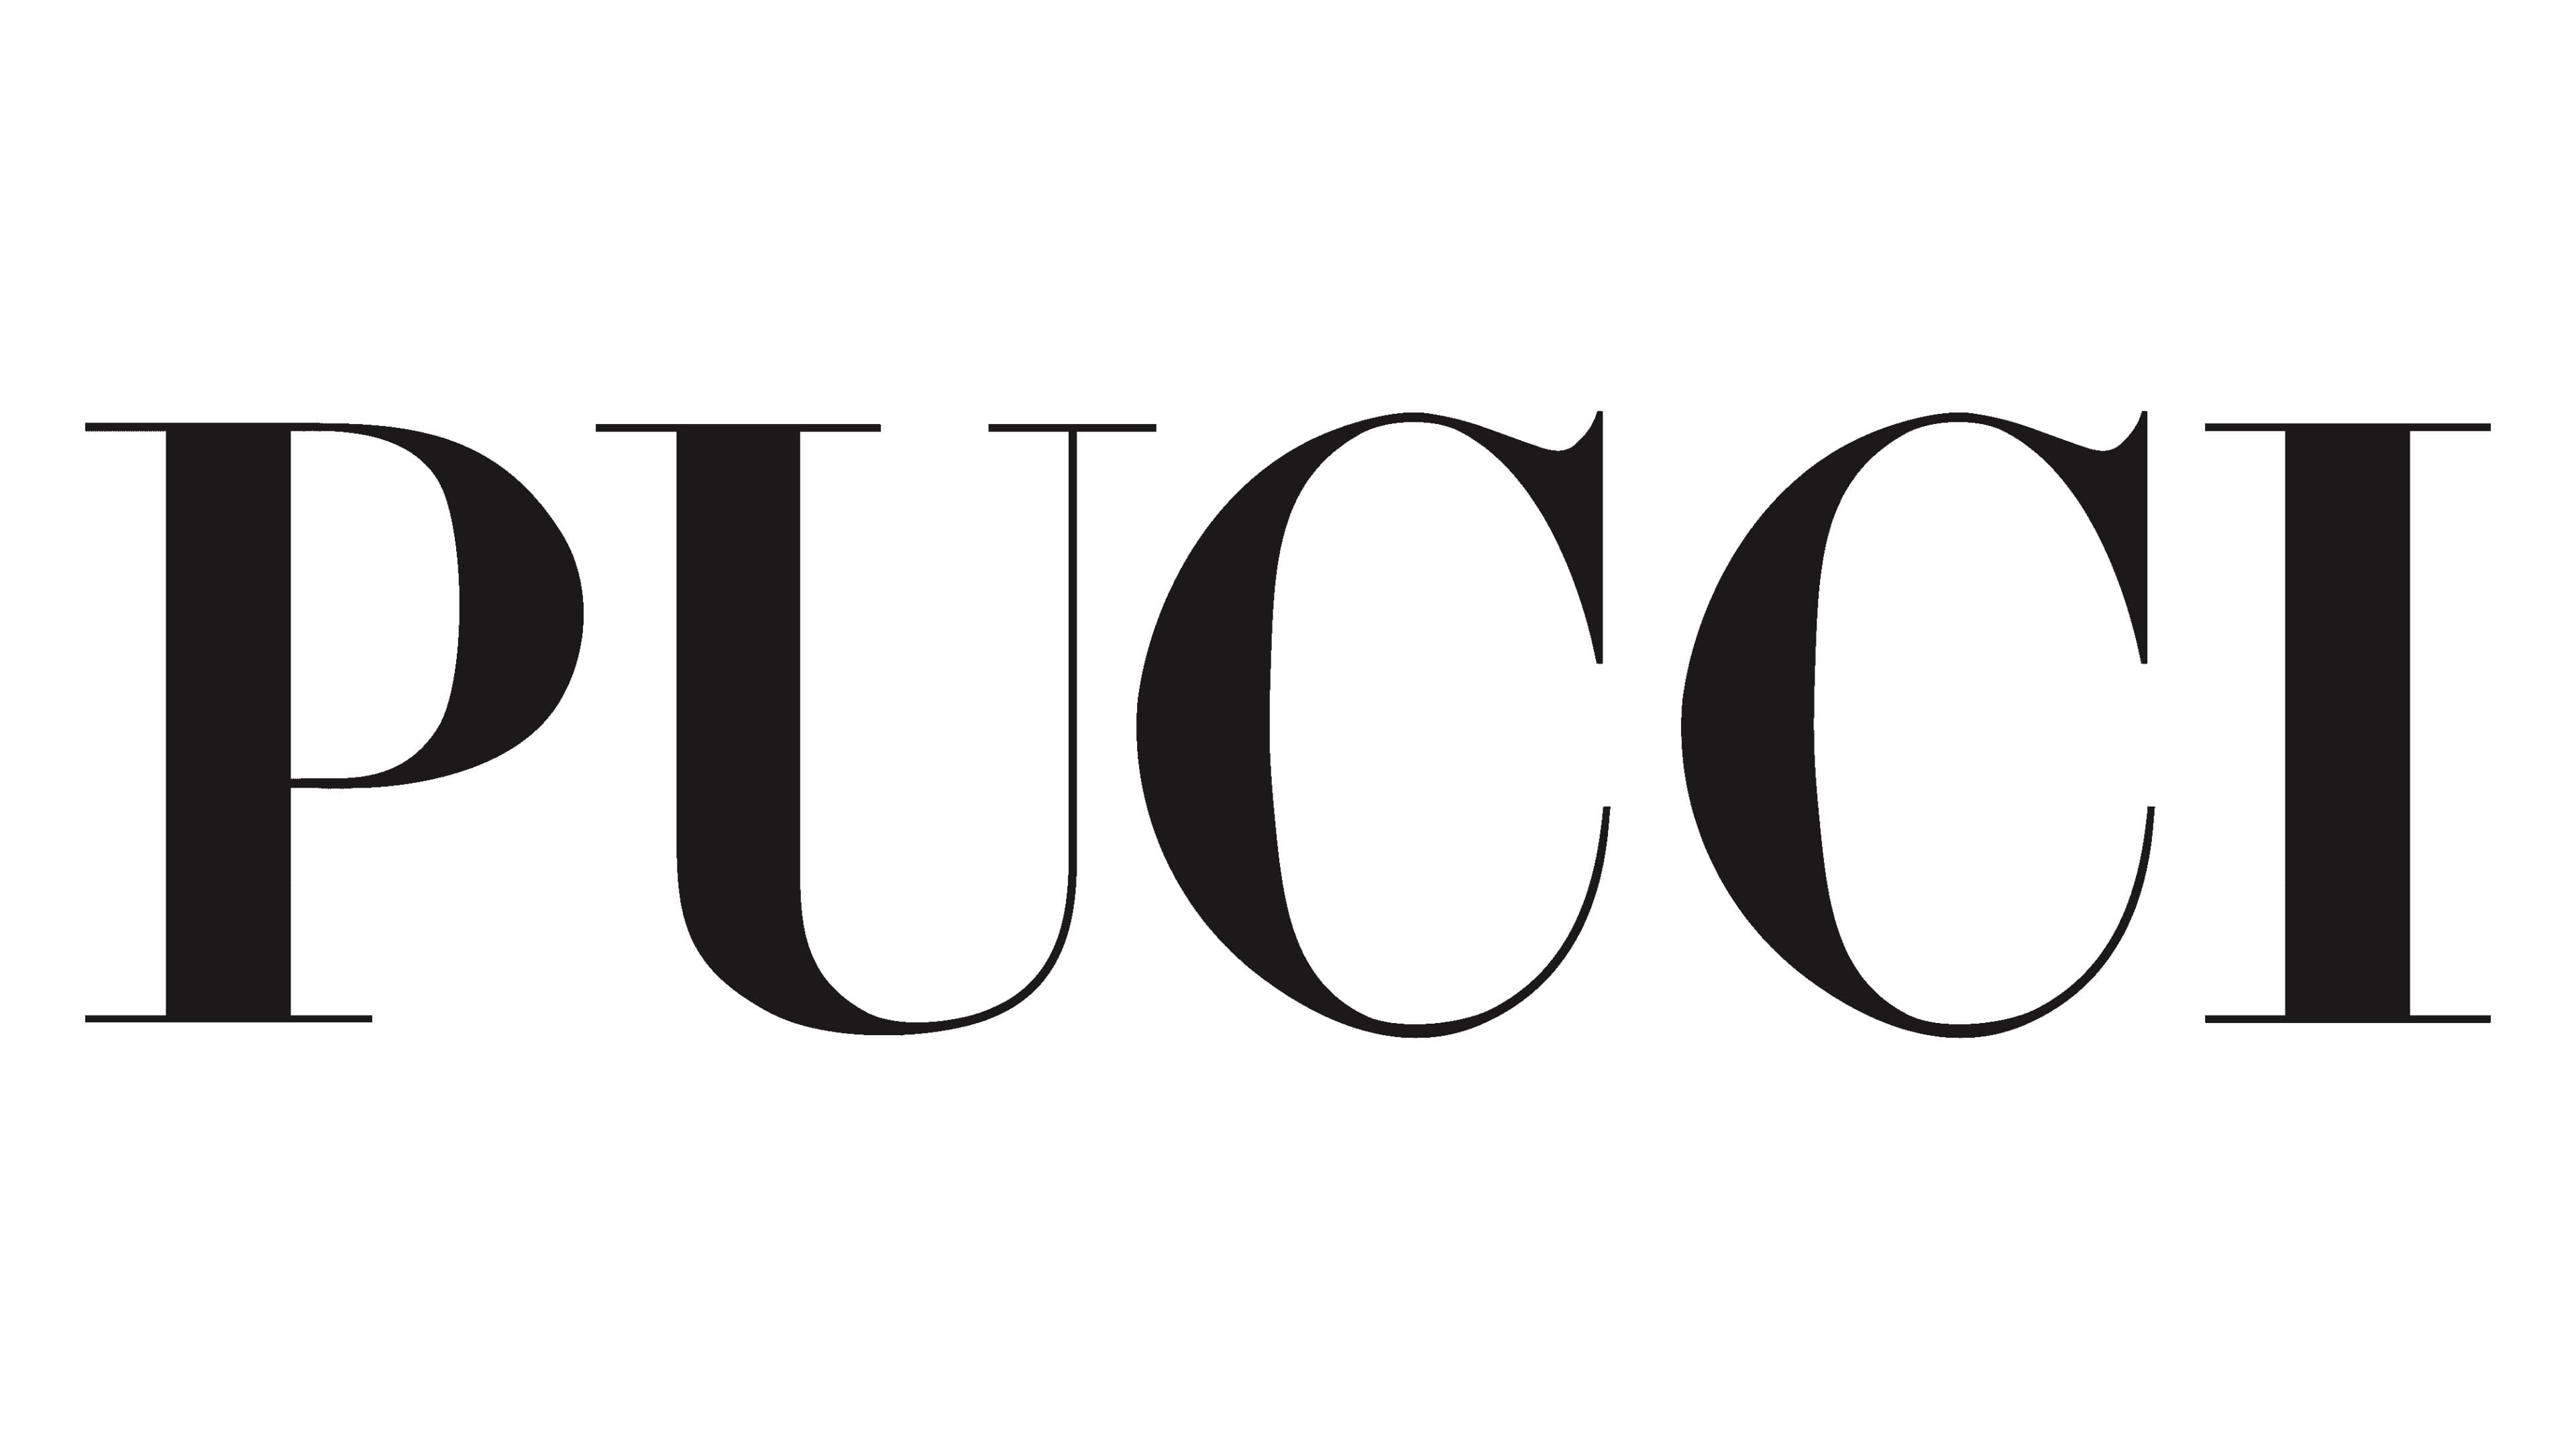 Emilio Pucci Logo and symbol, meaning, history, PNG, brand